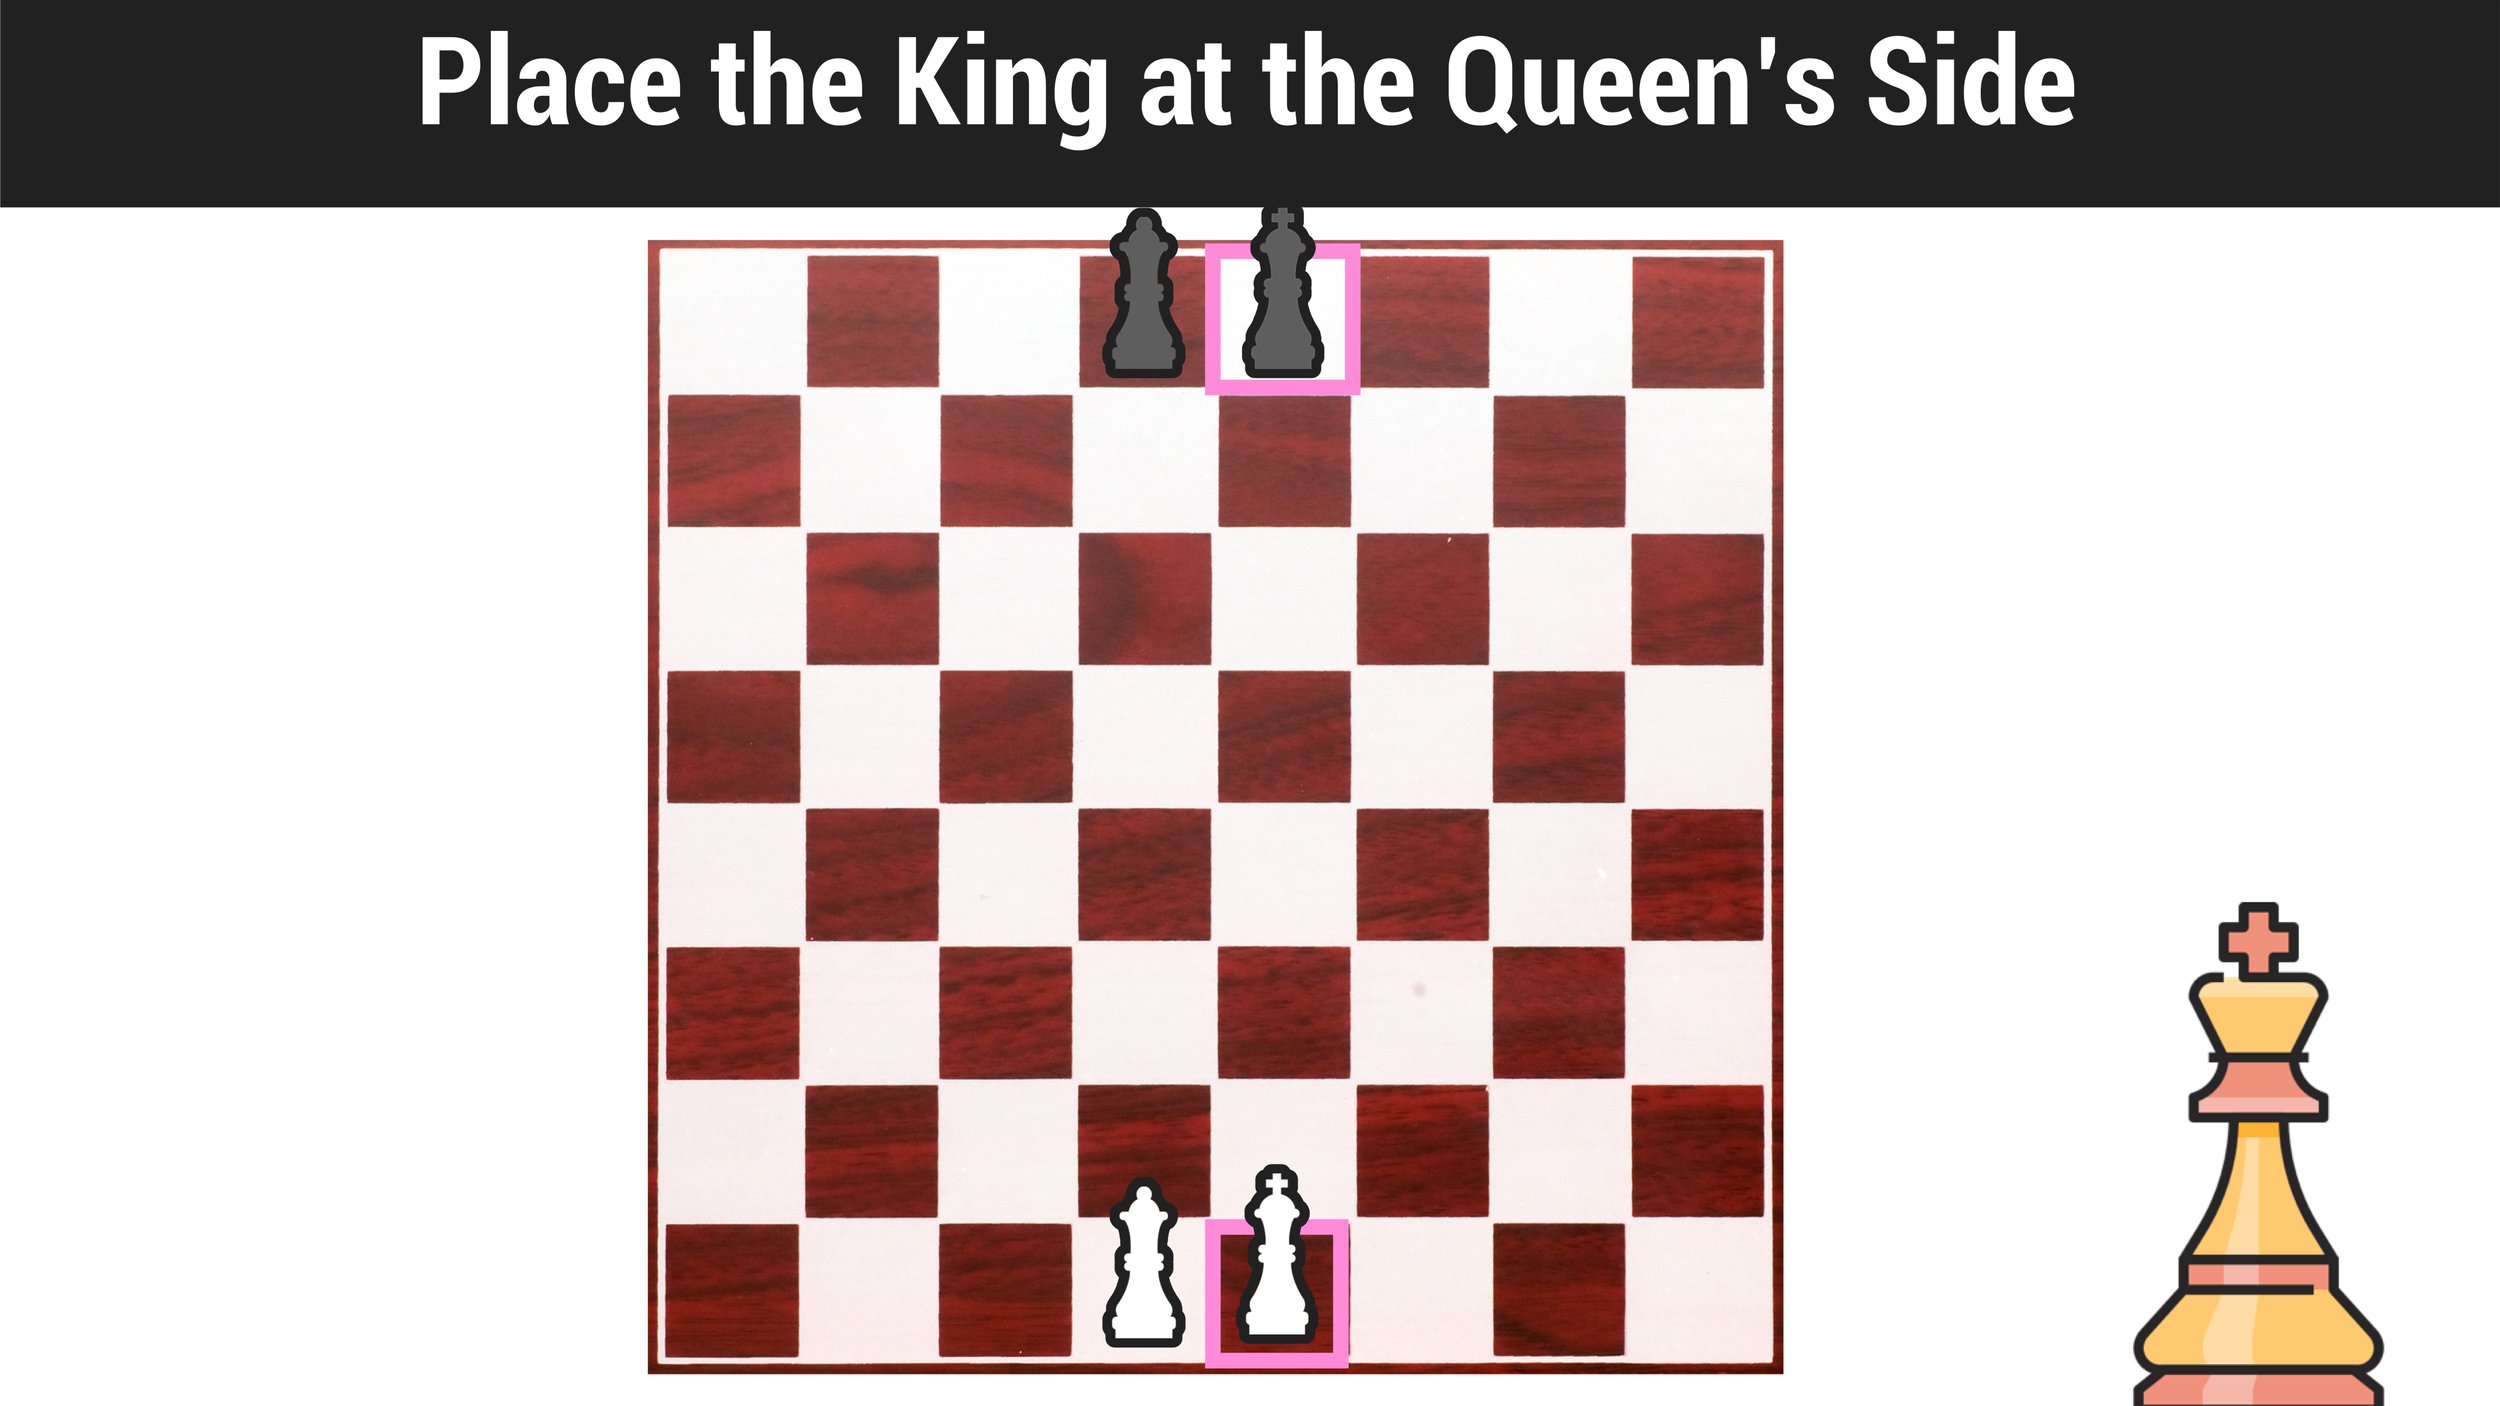 Chess Strategy – Step by Step –